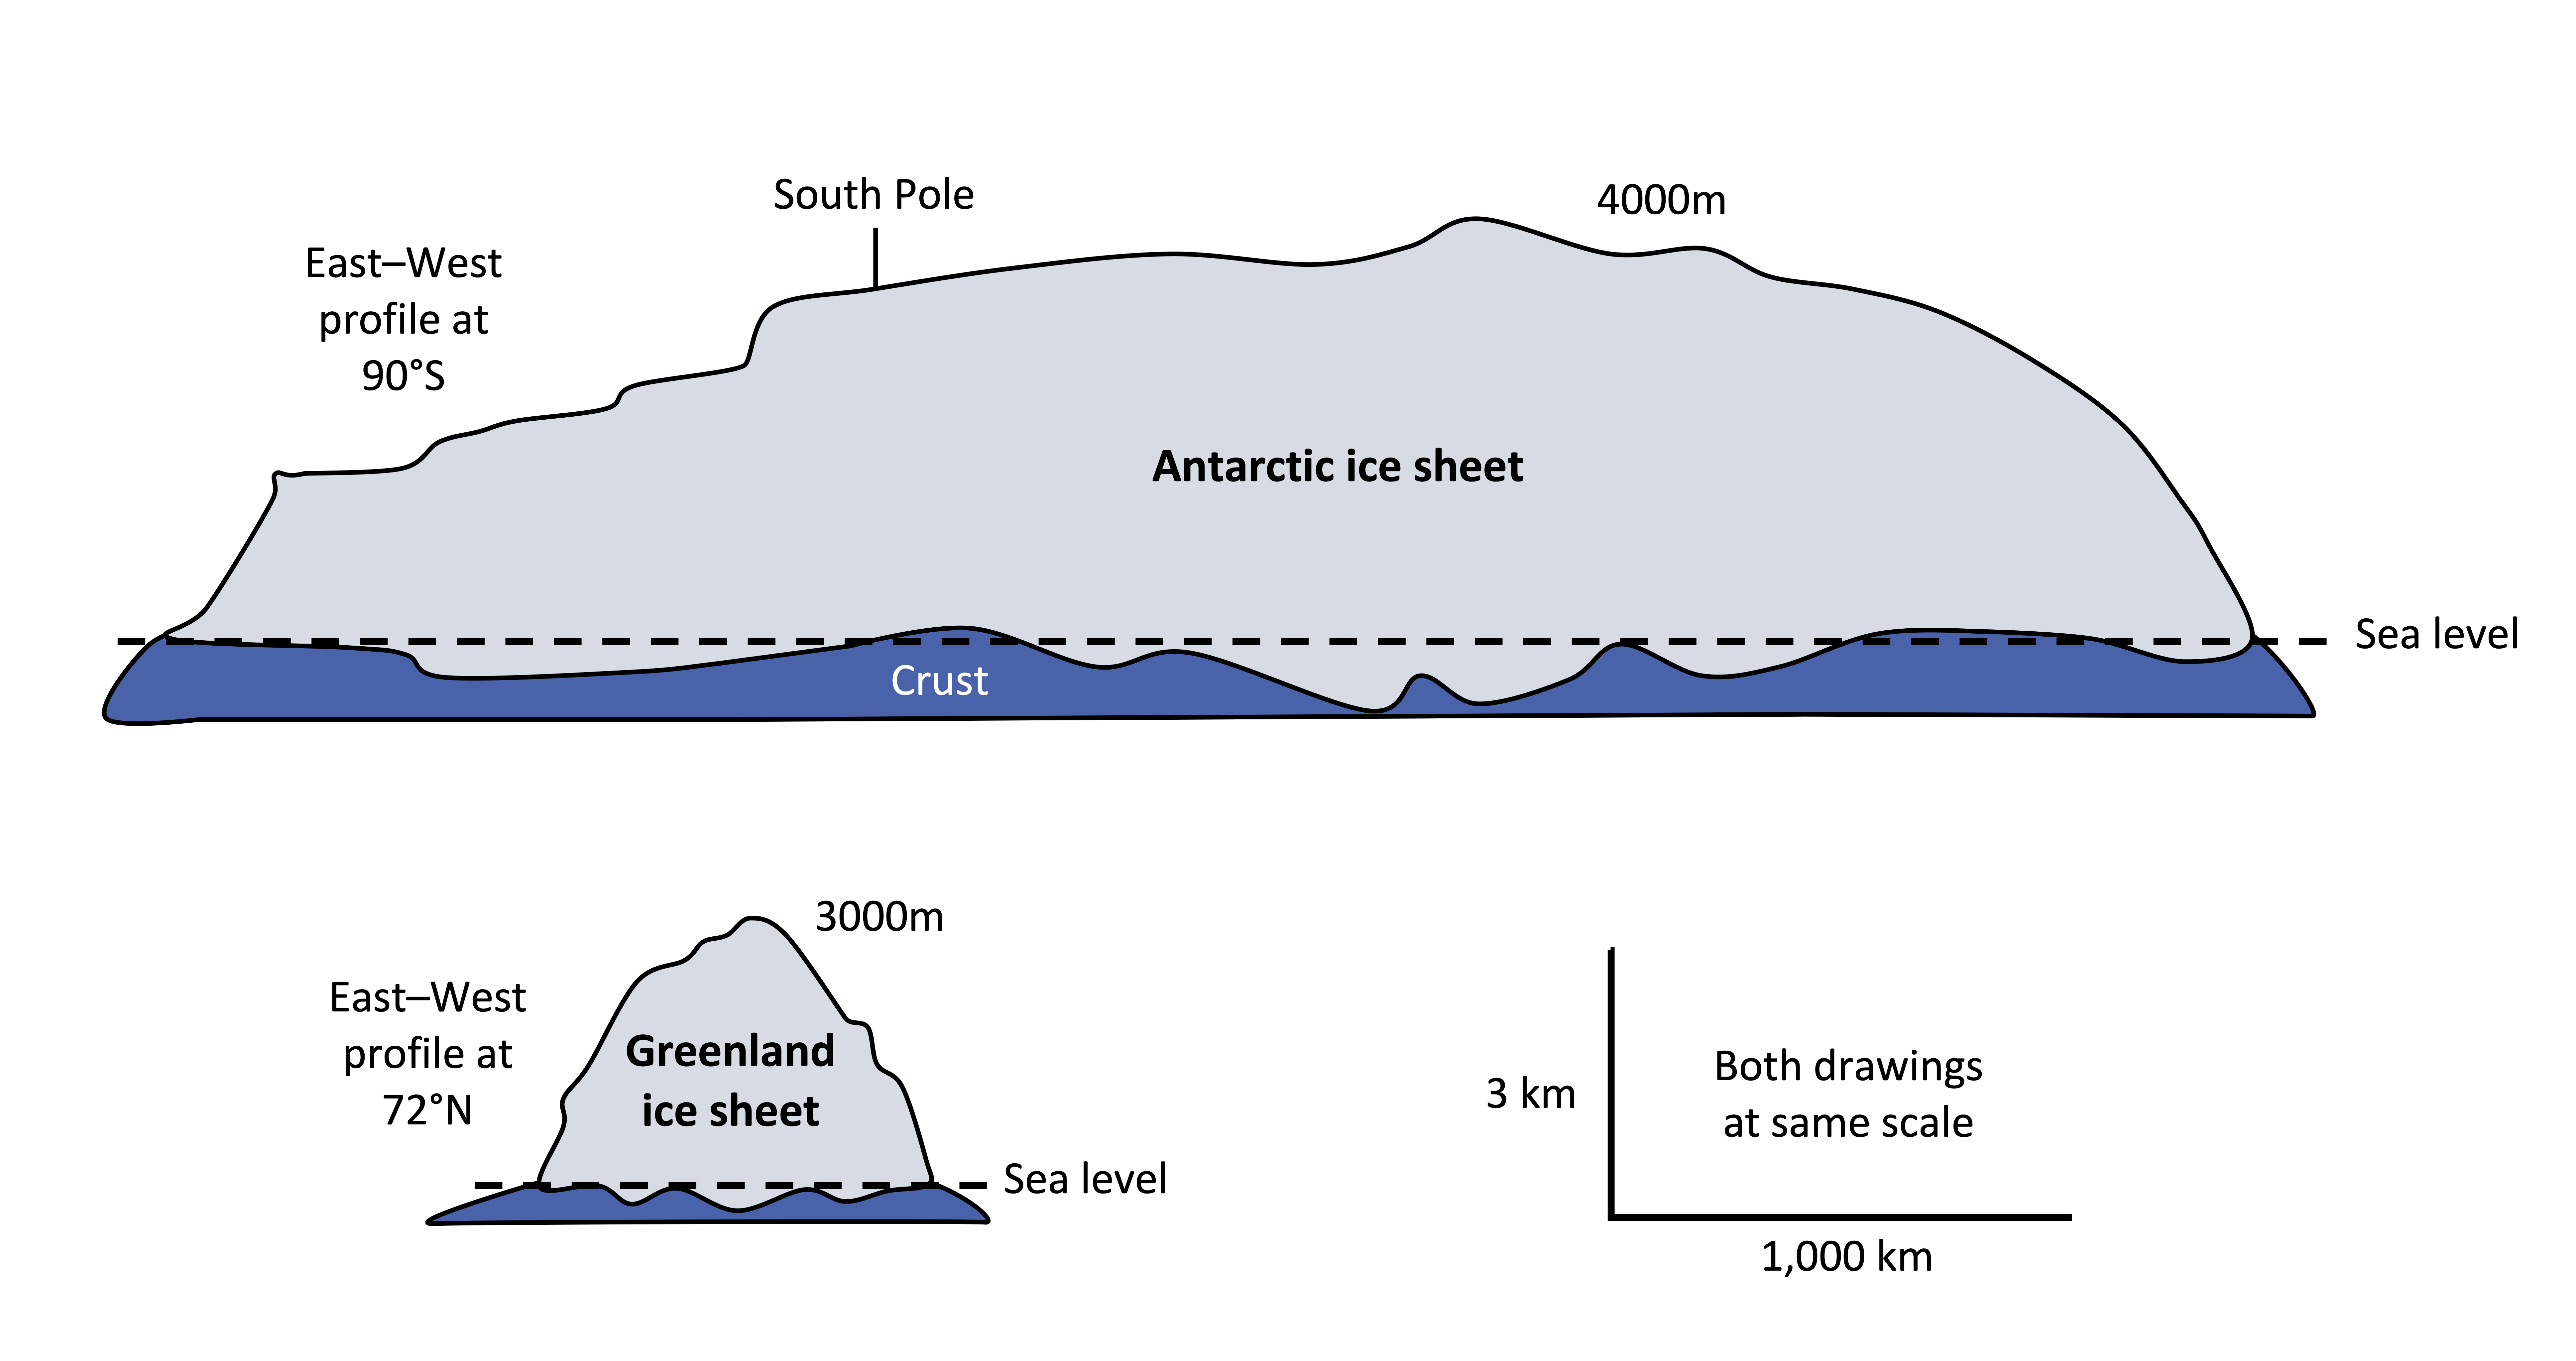 Antarctic ice sheet is very wide (roughly 6,000km). Greenland ice sheet is narrower (roughly 1,000 km). Both ice sheets have roughly the same height. Crust of each ice sheet remains at or below sea level.